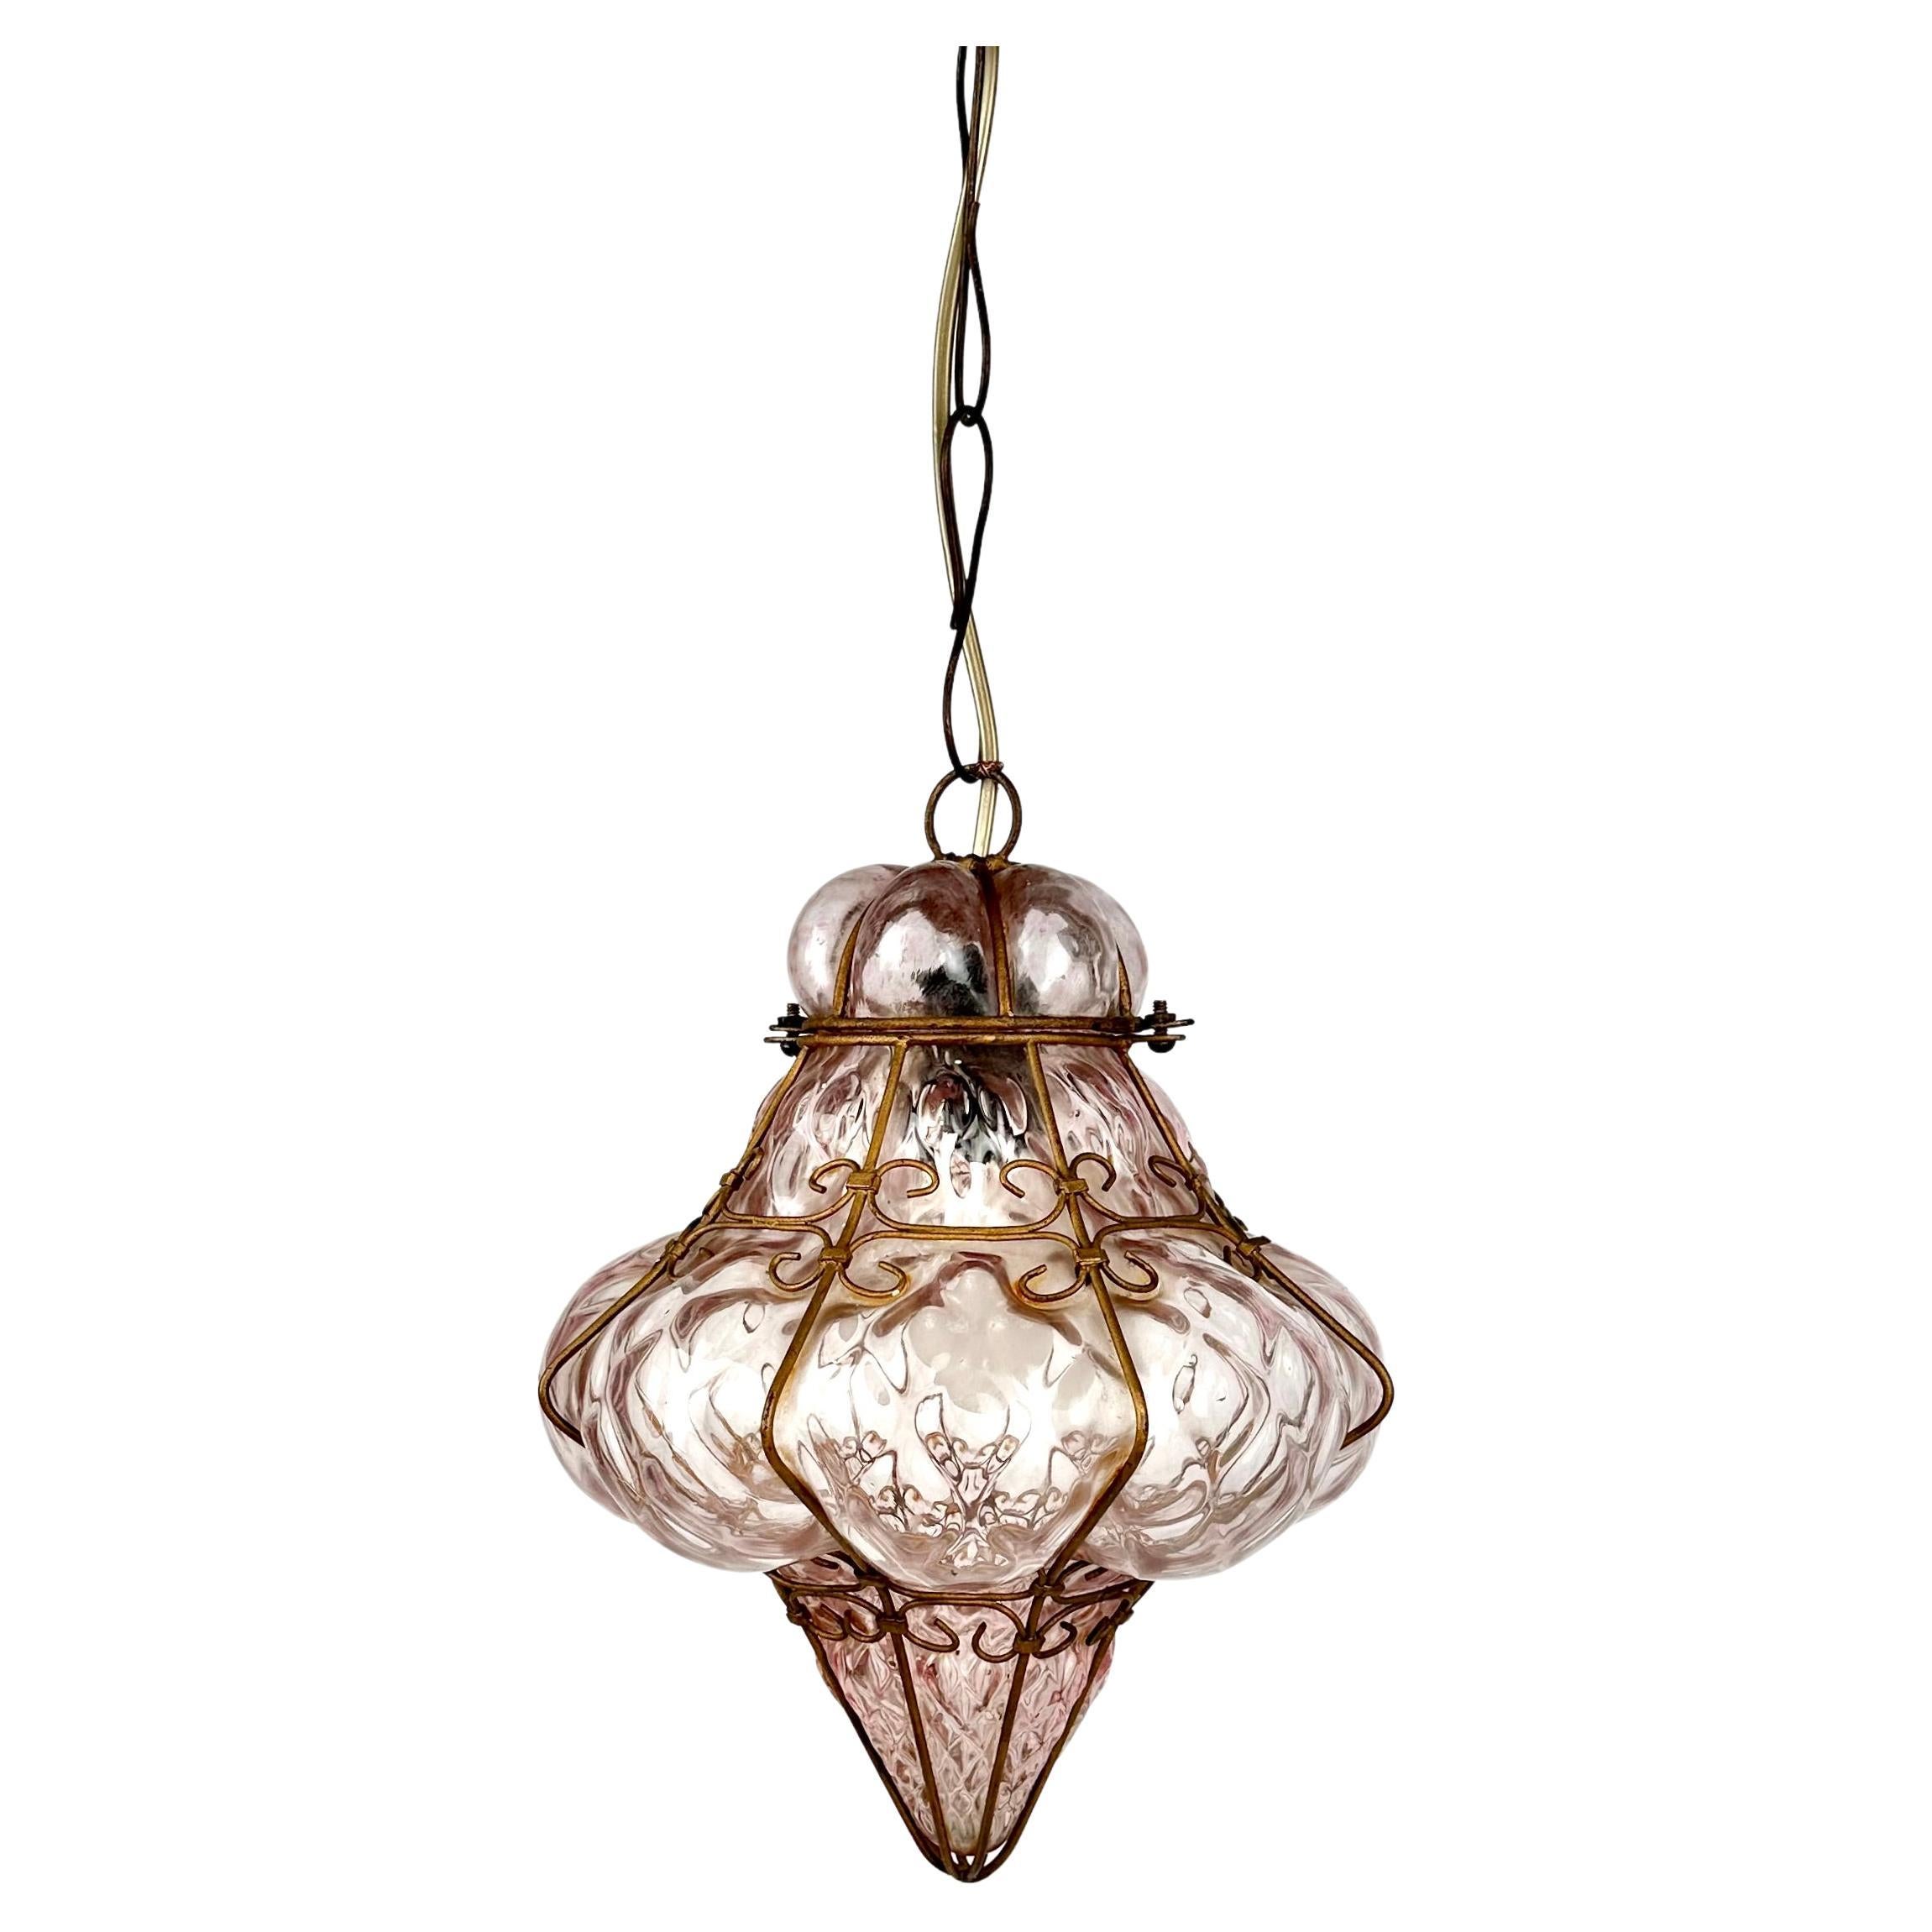 Midcentury beautiful pendant light in dust pink colored murano handblown glass surrounded by a gold metal cage by the master Venetian Glass Blower Seguso.

Made in Italy in the 1940s.

Perfect to hang over your kitchen bench, dining room table or